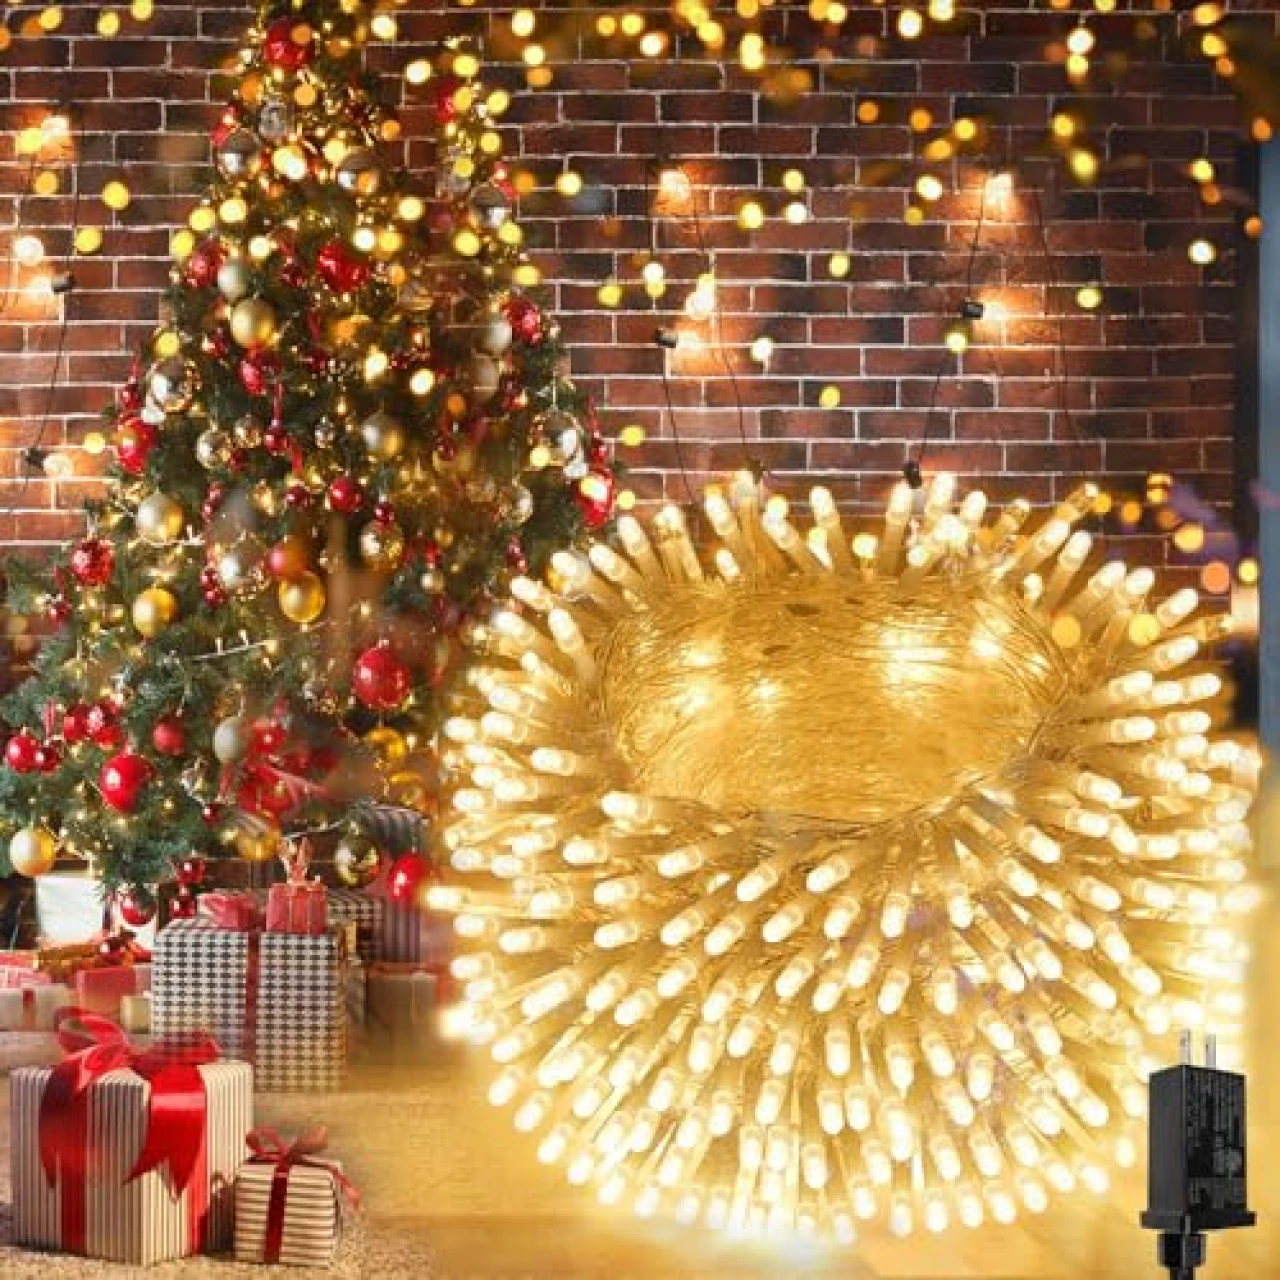 Extra-Long 66FT Christmas Lights Outdoor/Indoor, 200 LED Upgraded Super Bright String Lights, Waterproof 8 Modes Plug in Twinkle Fairy Lights for Christmas Tree Christmas Decorations (Warm White)